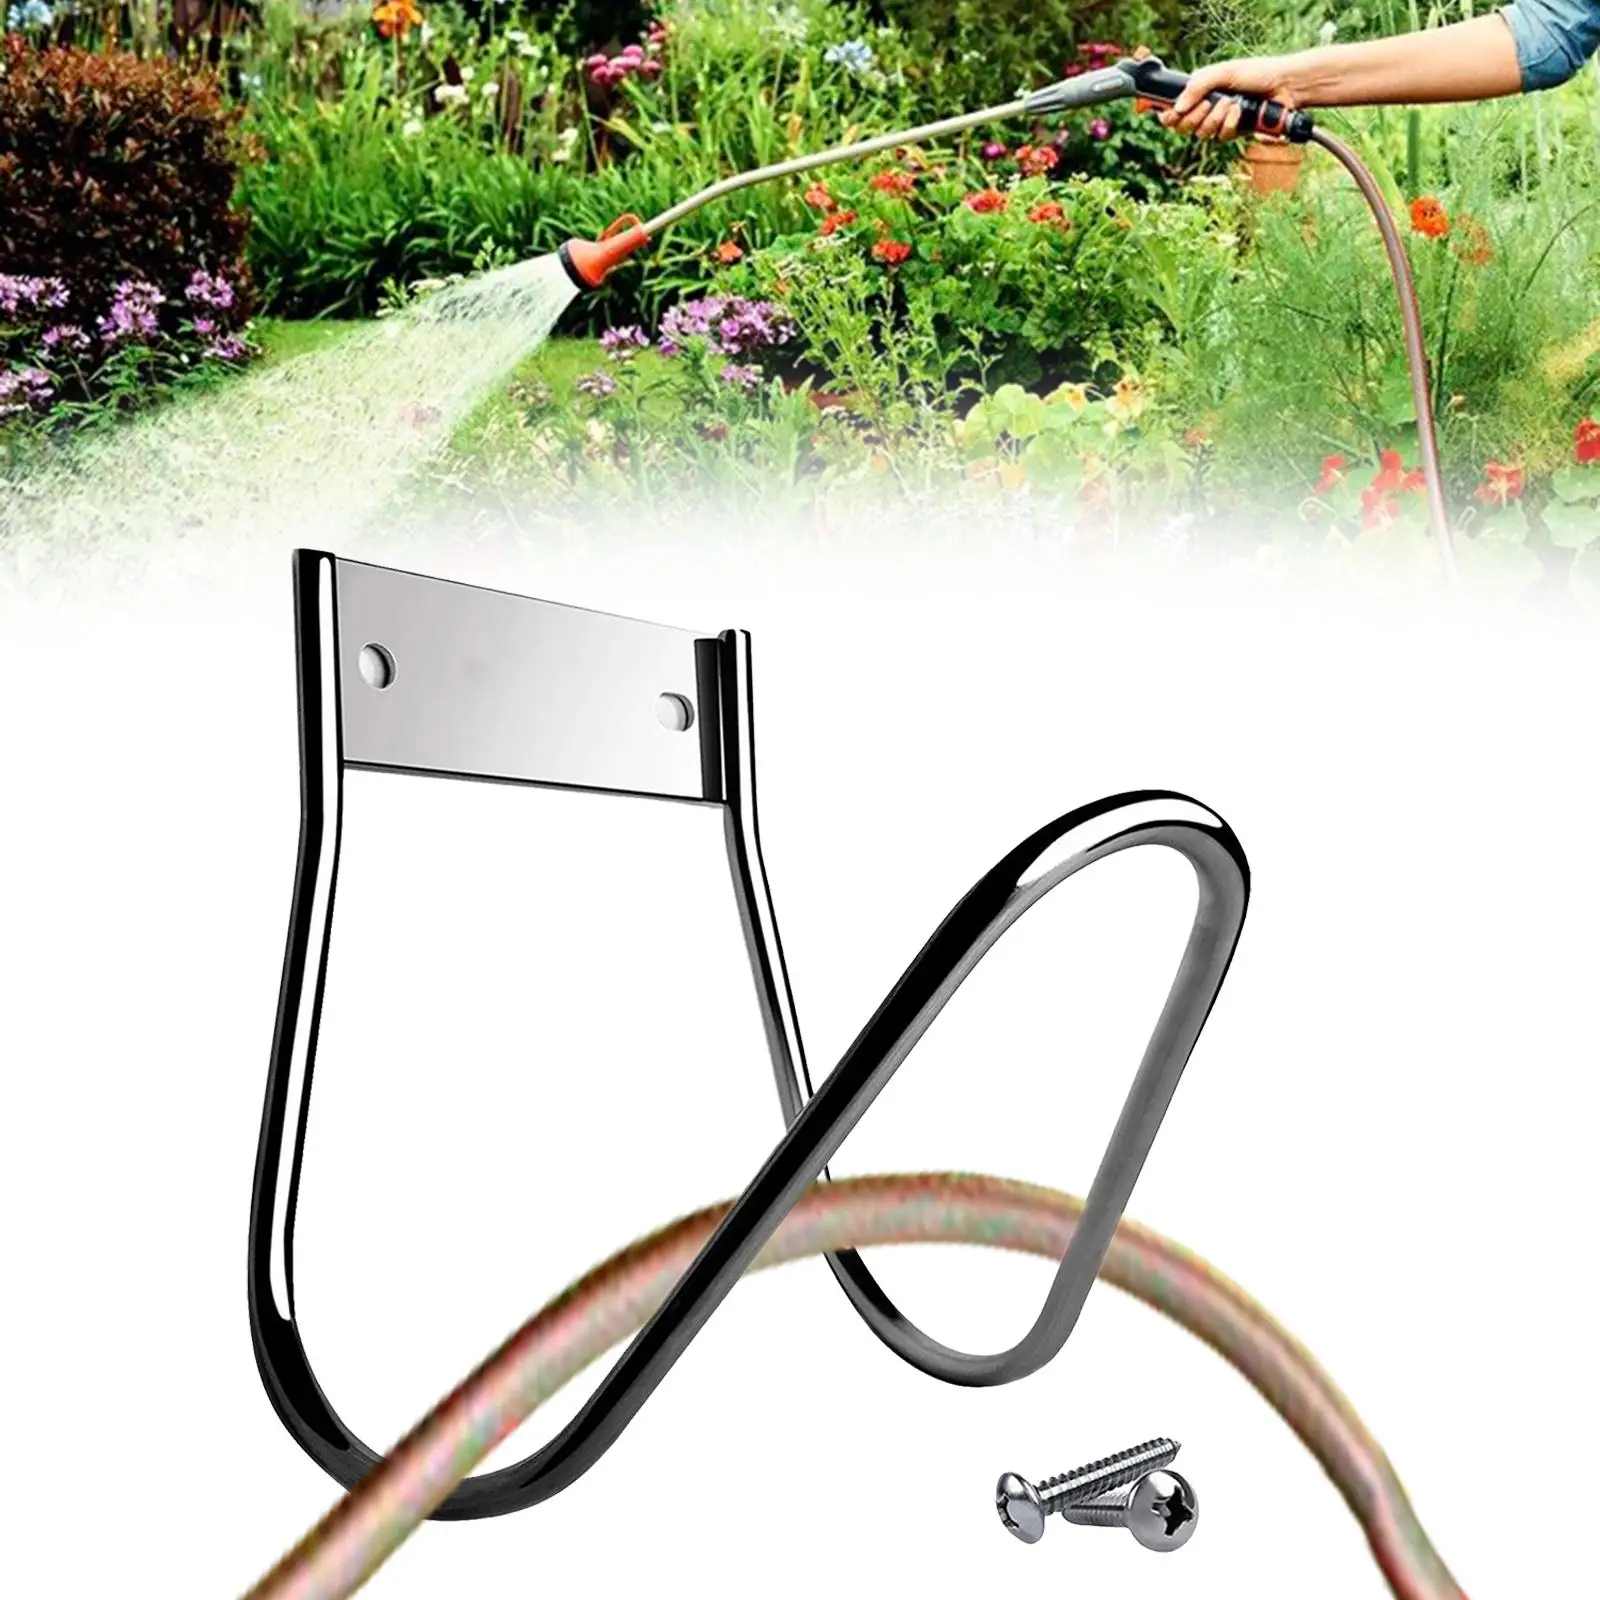 Garden Hose Rack Garden Hose Hanger Garden Hose Holder Wall Mounted for Patio Lawn Garage Storage Water Hose Extension Cords